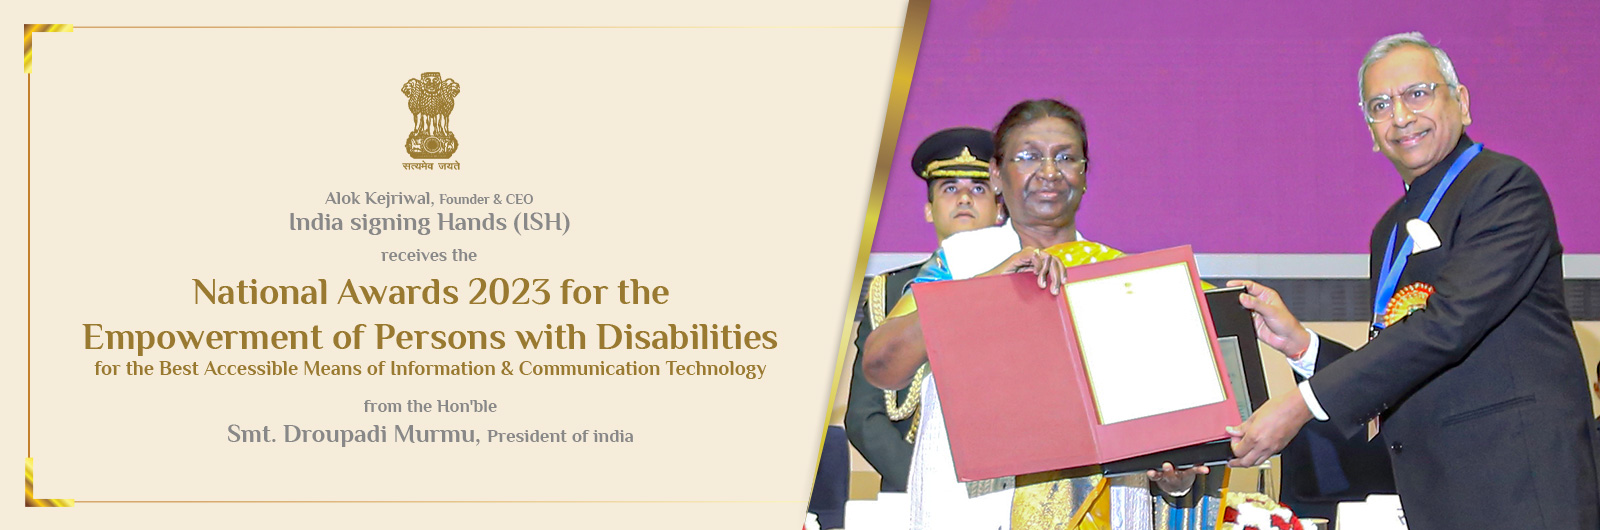 National Award - Accessibility in Communications and Information Technology